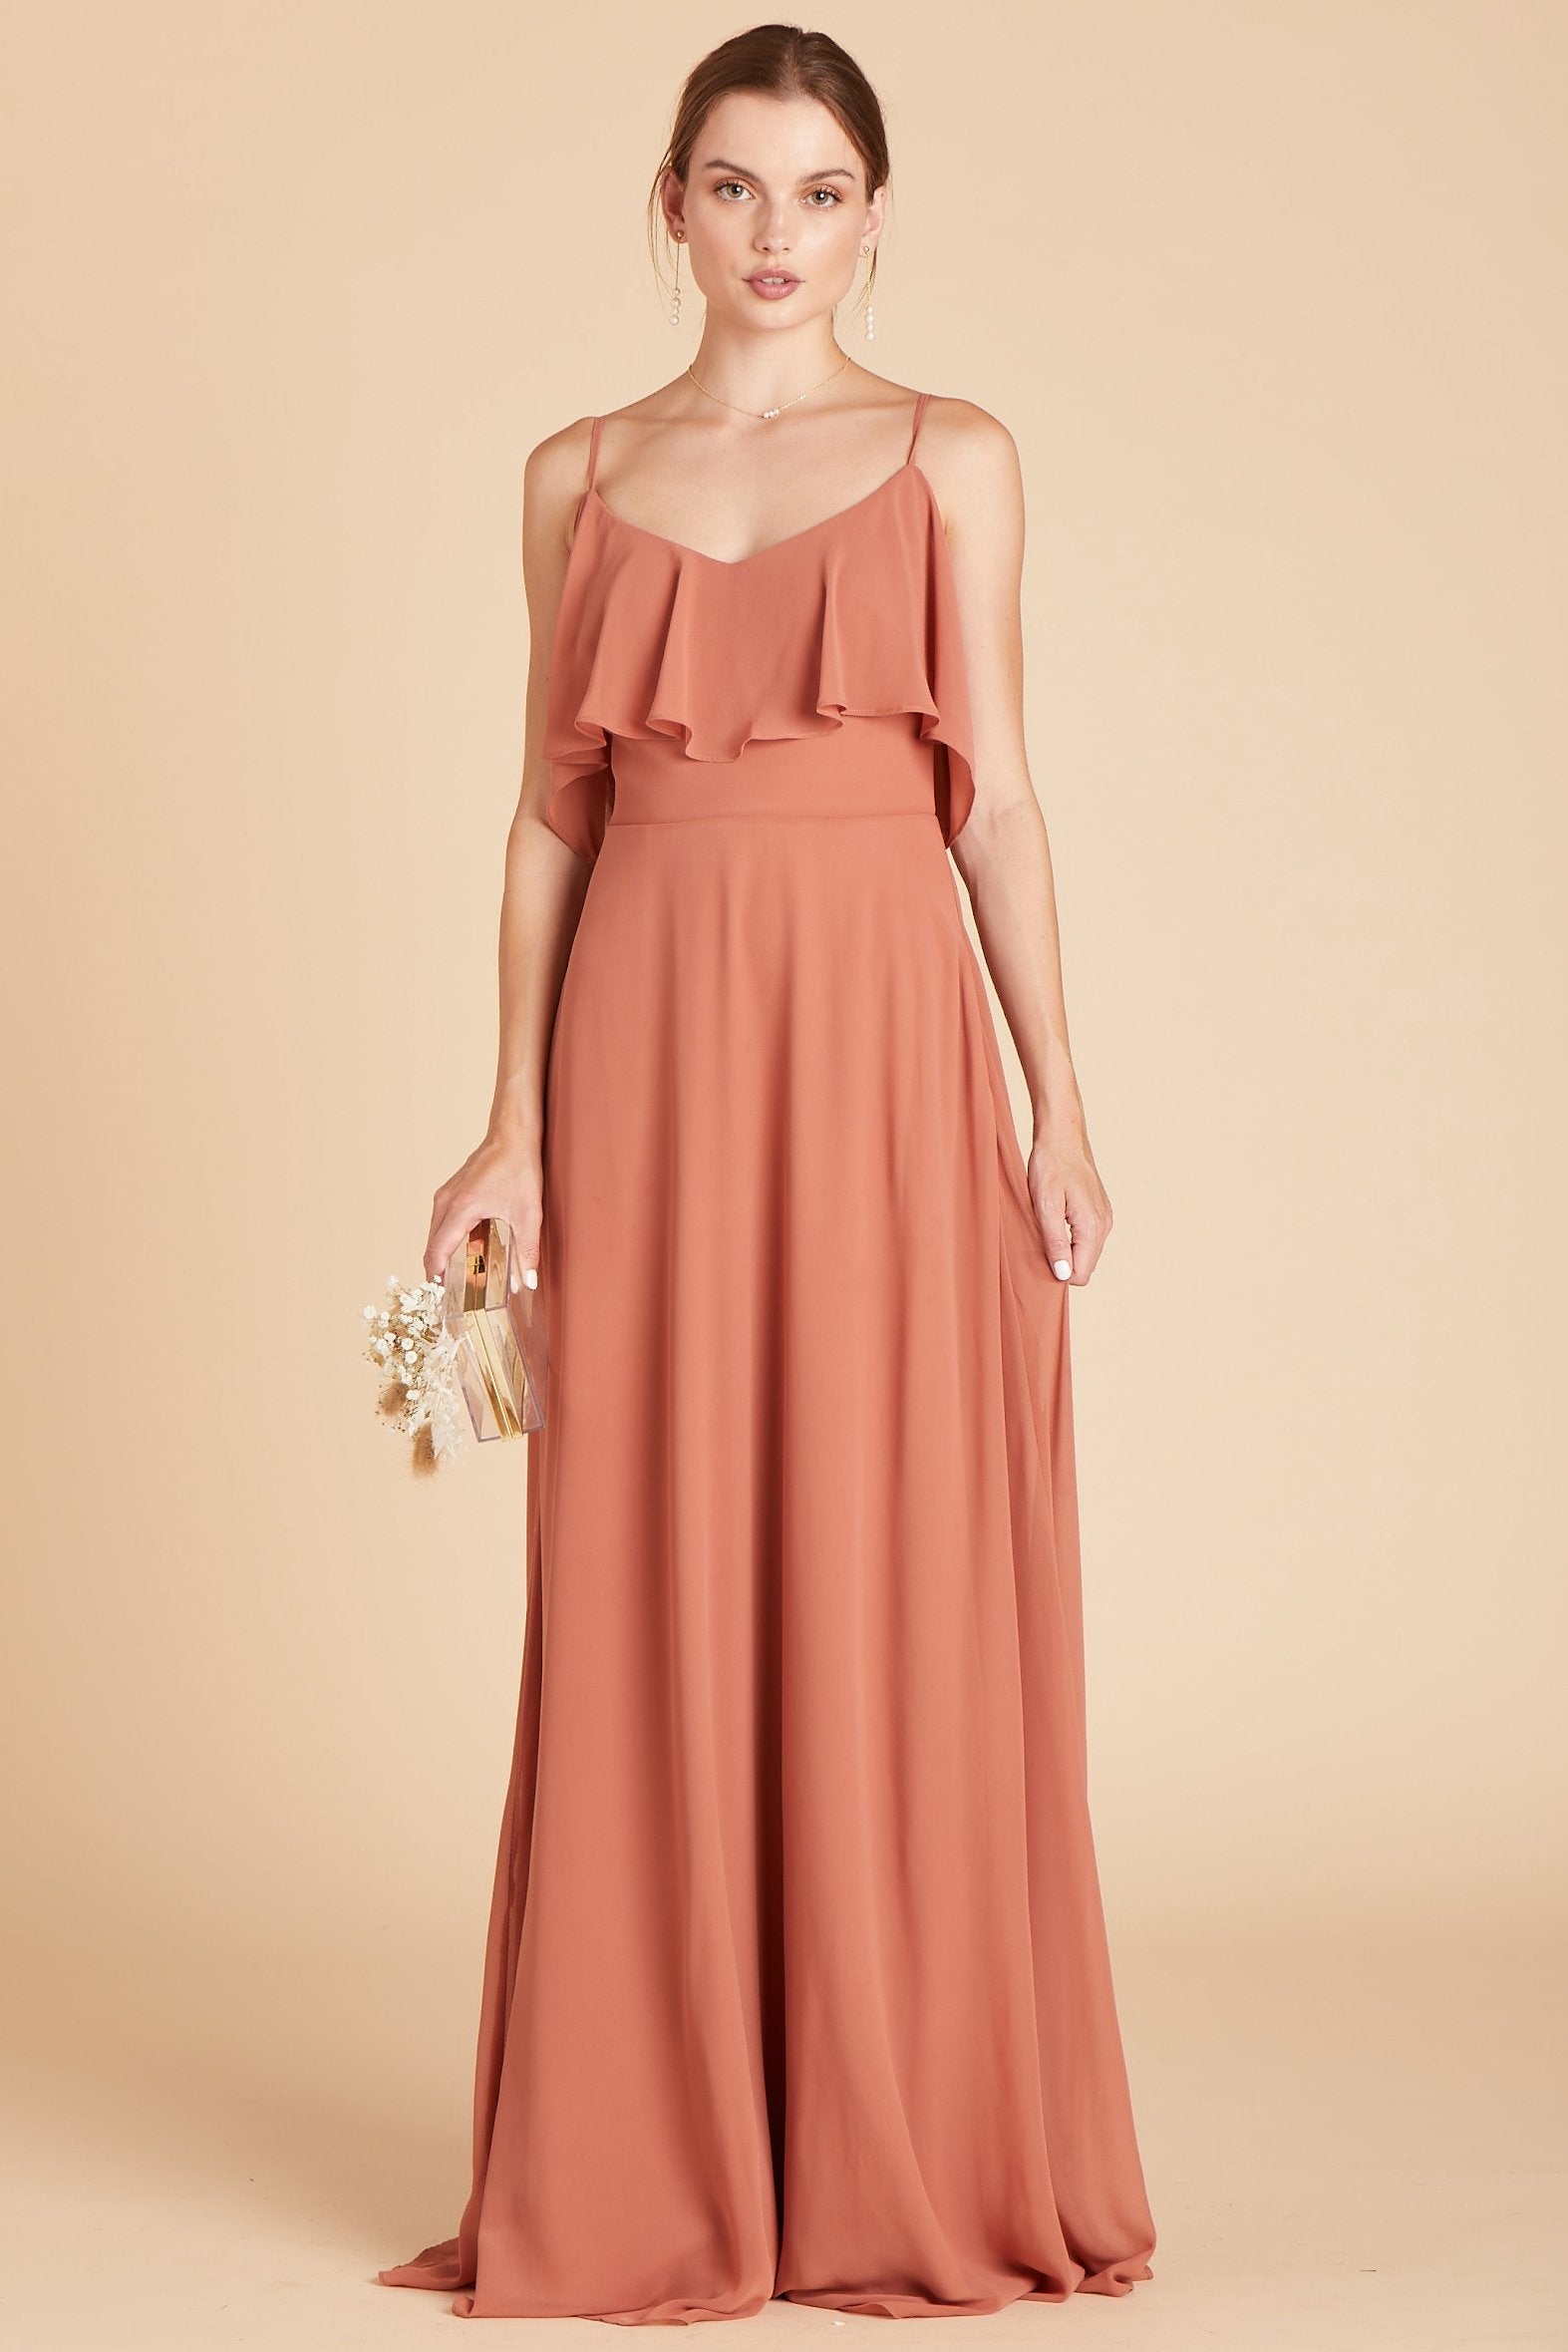 Jane convertible bridesmaid dress in terracotta orange chiffon by Birdy Grey, front view